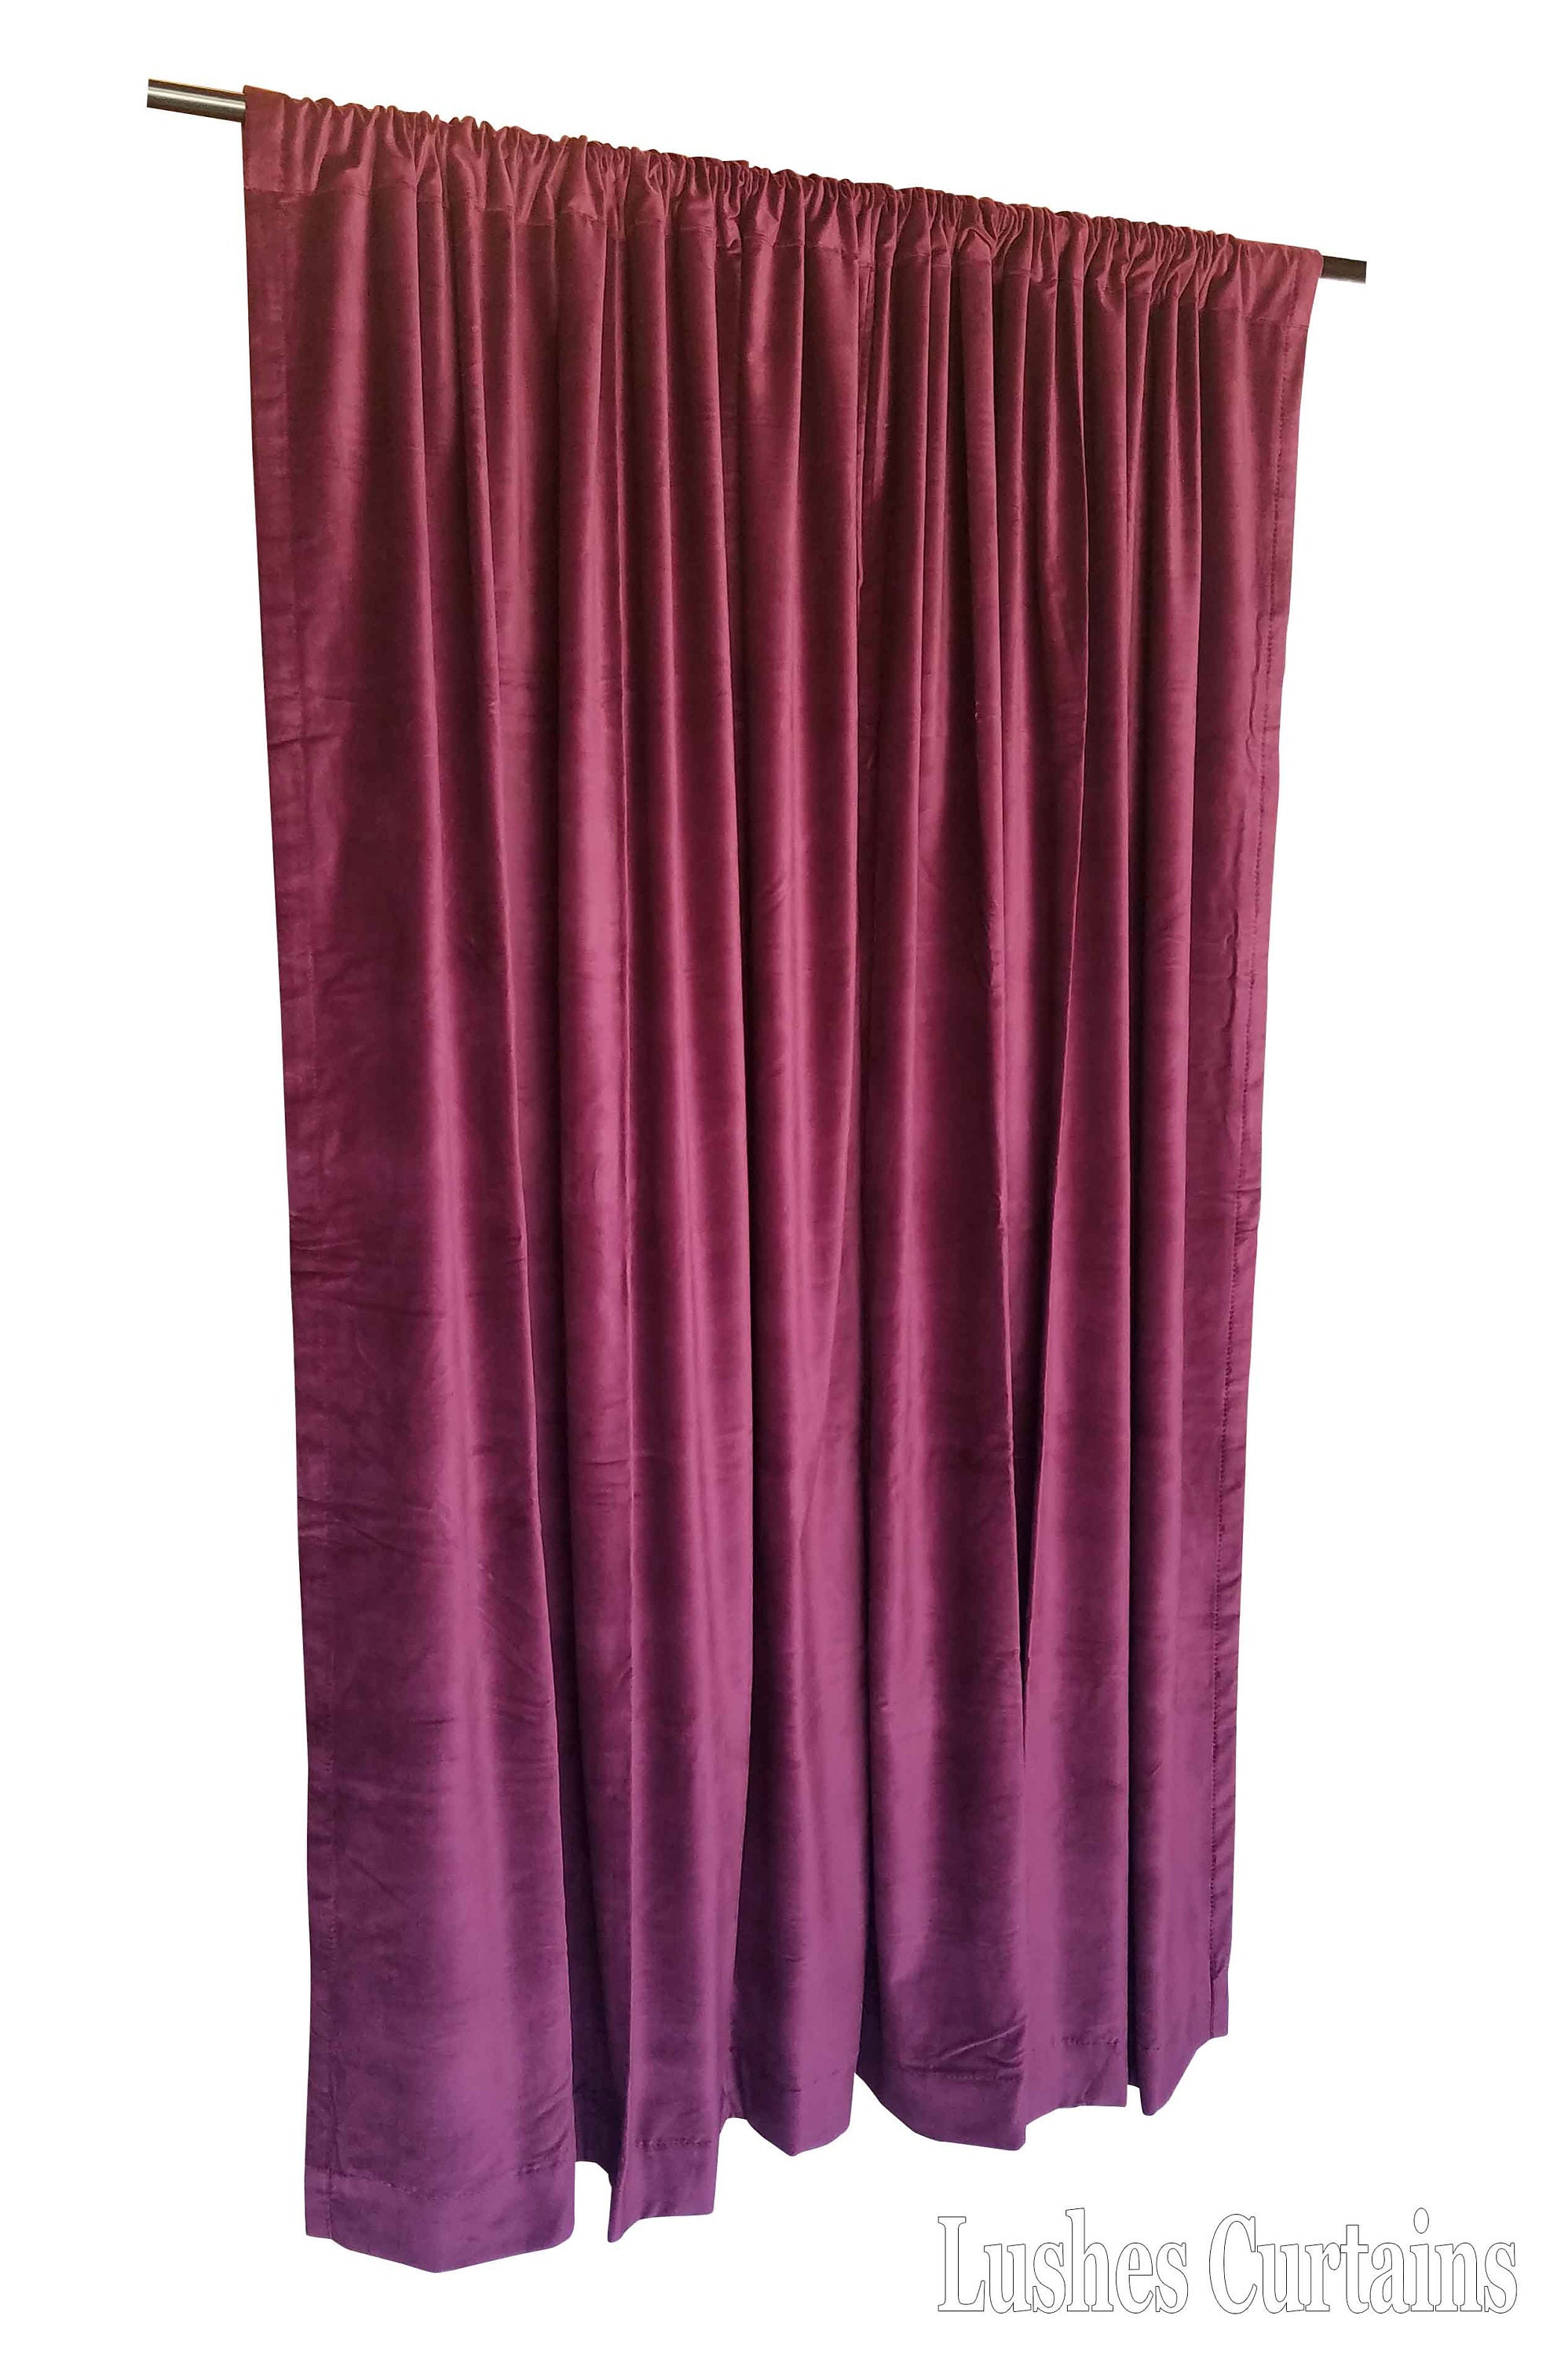 Black Theater Noise/Sound Absorbing Drapery Thermal Velvet Curtain 96 in H Panel 